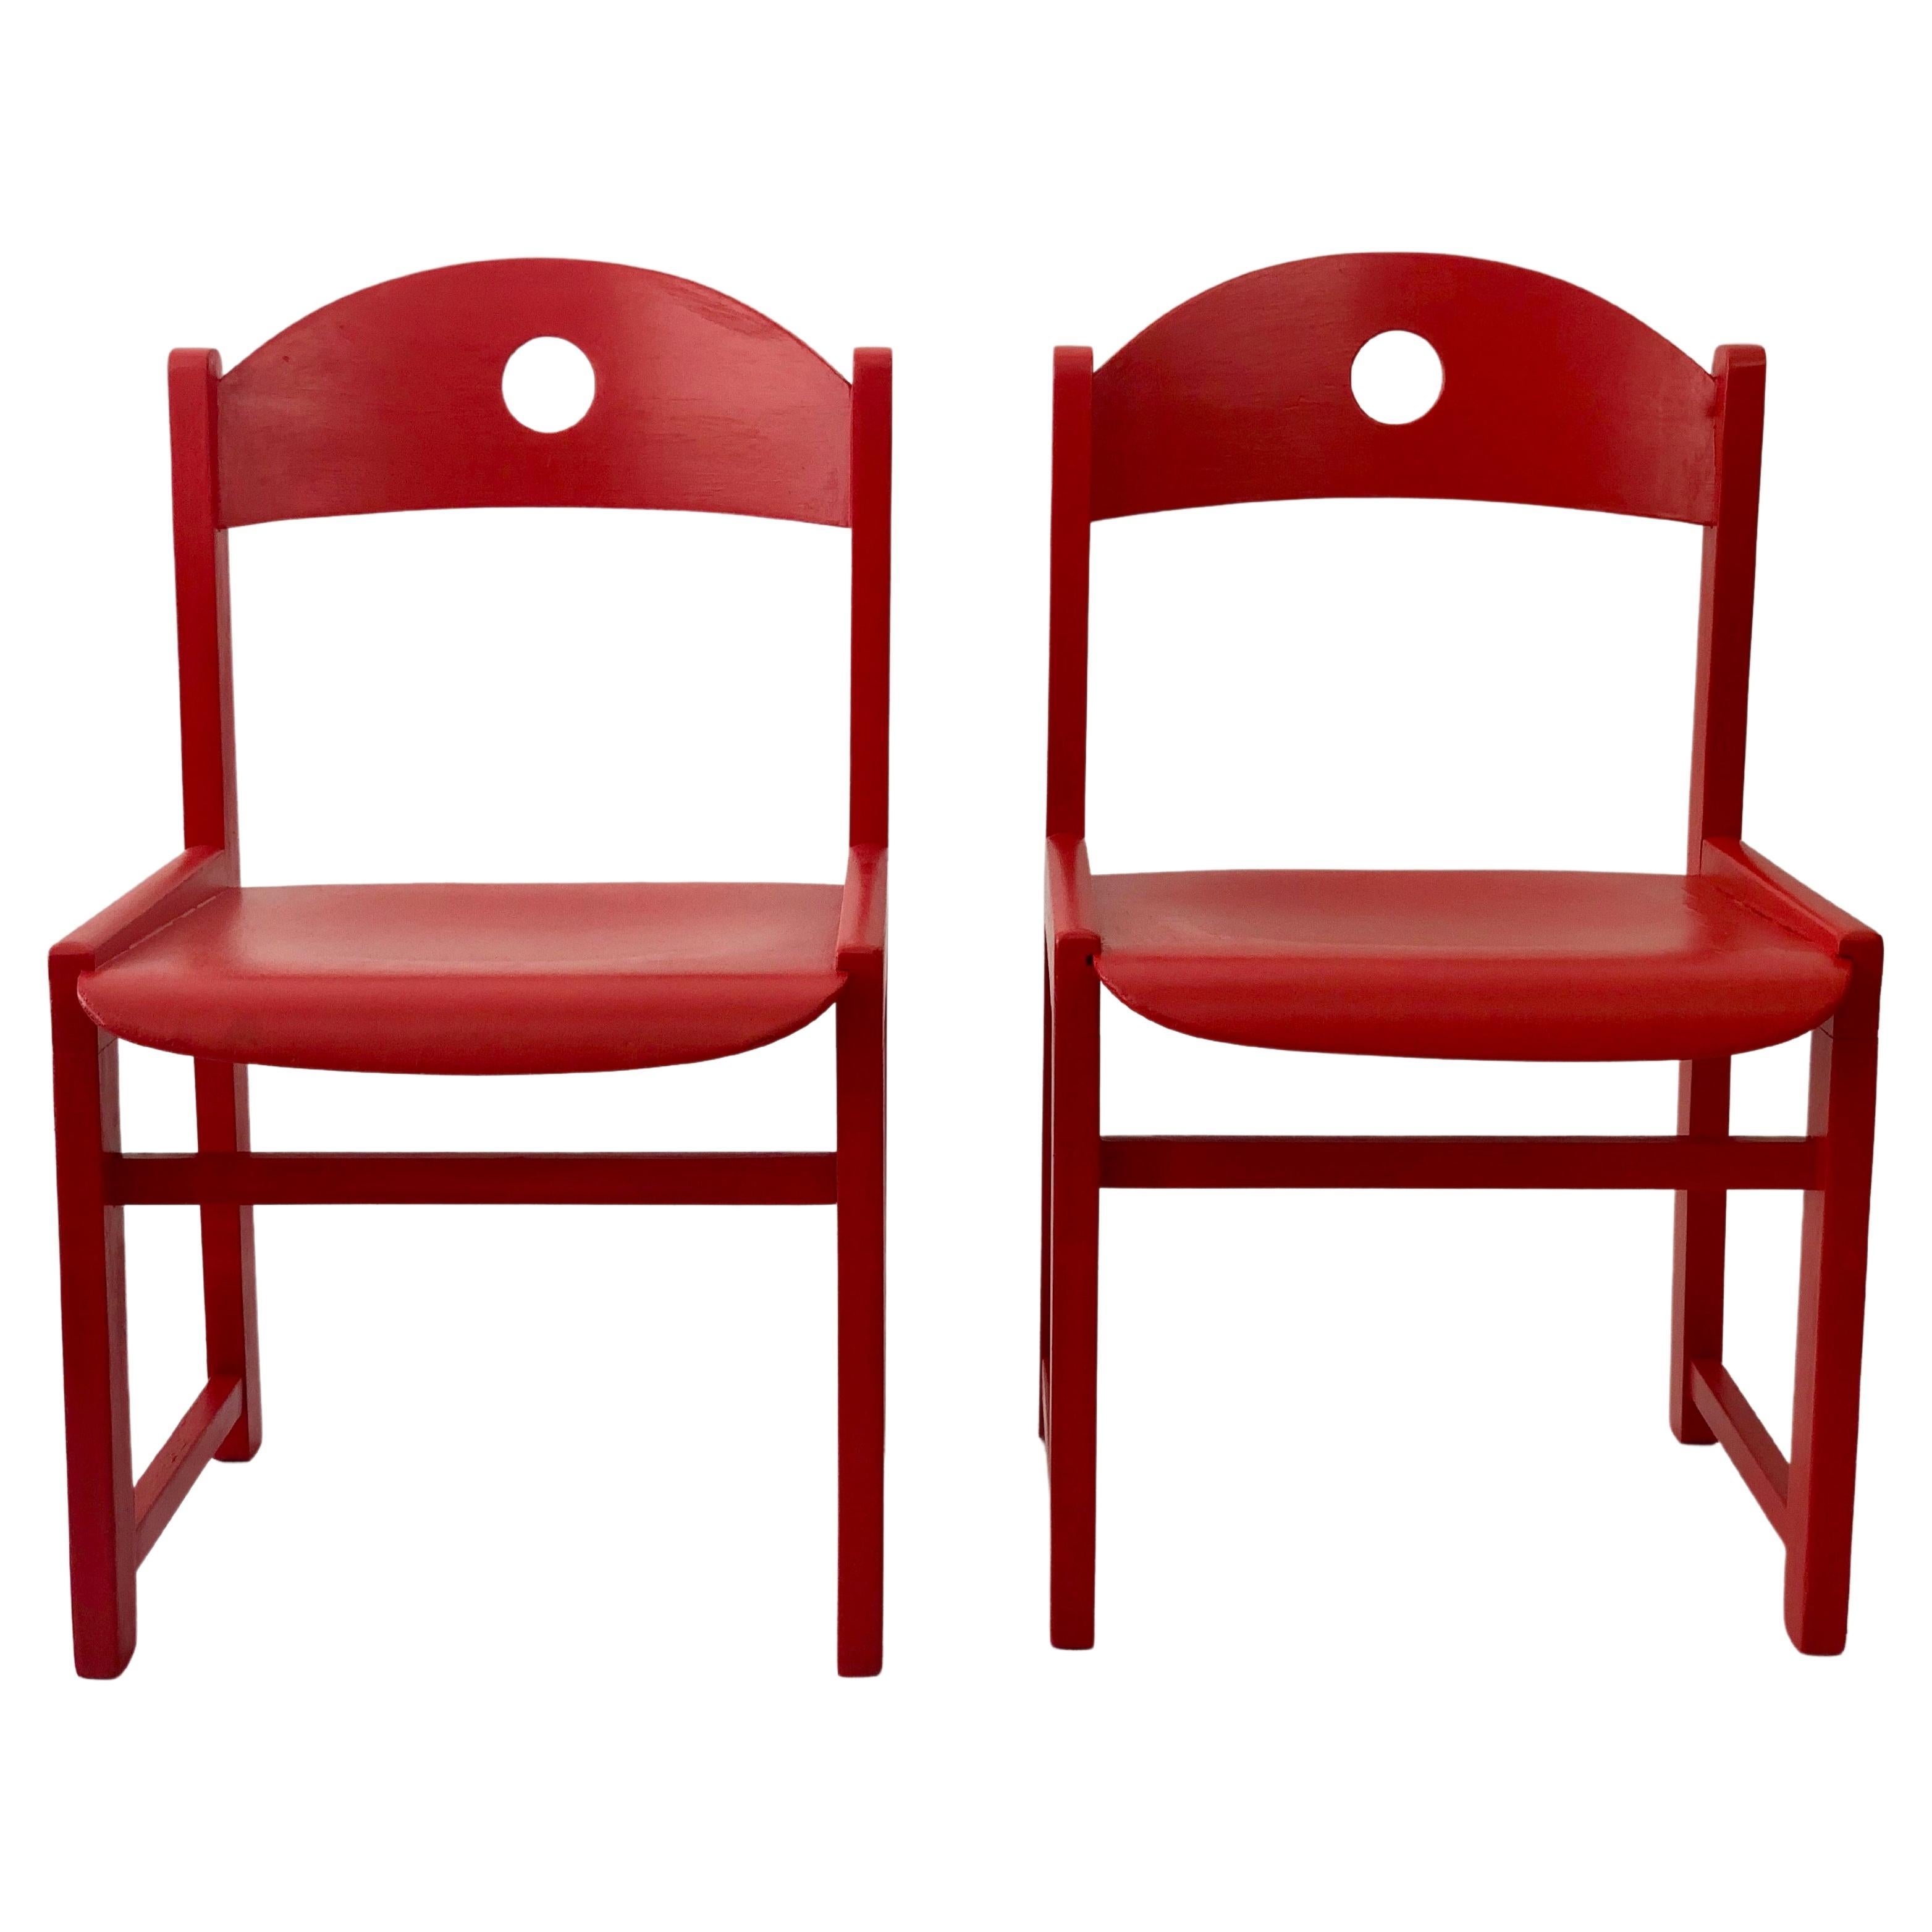 Pair of Red Painted Children Chairs from the 1970 's For Sale